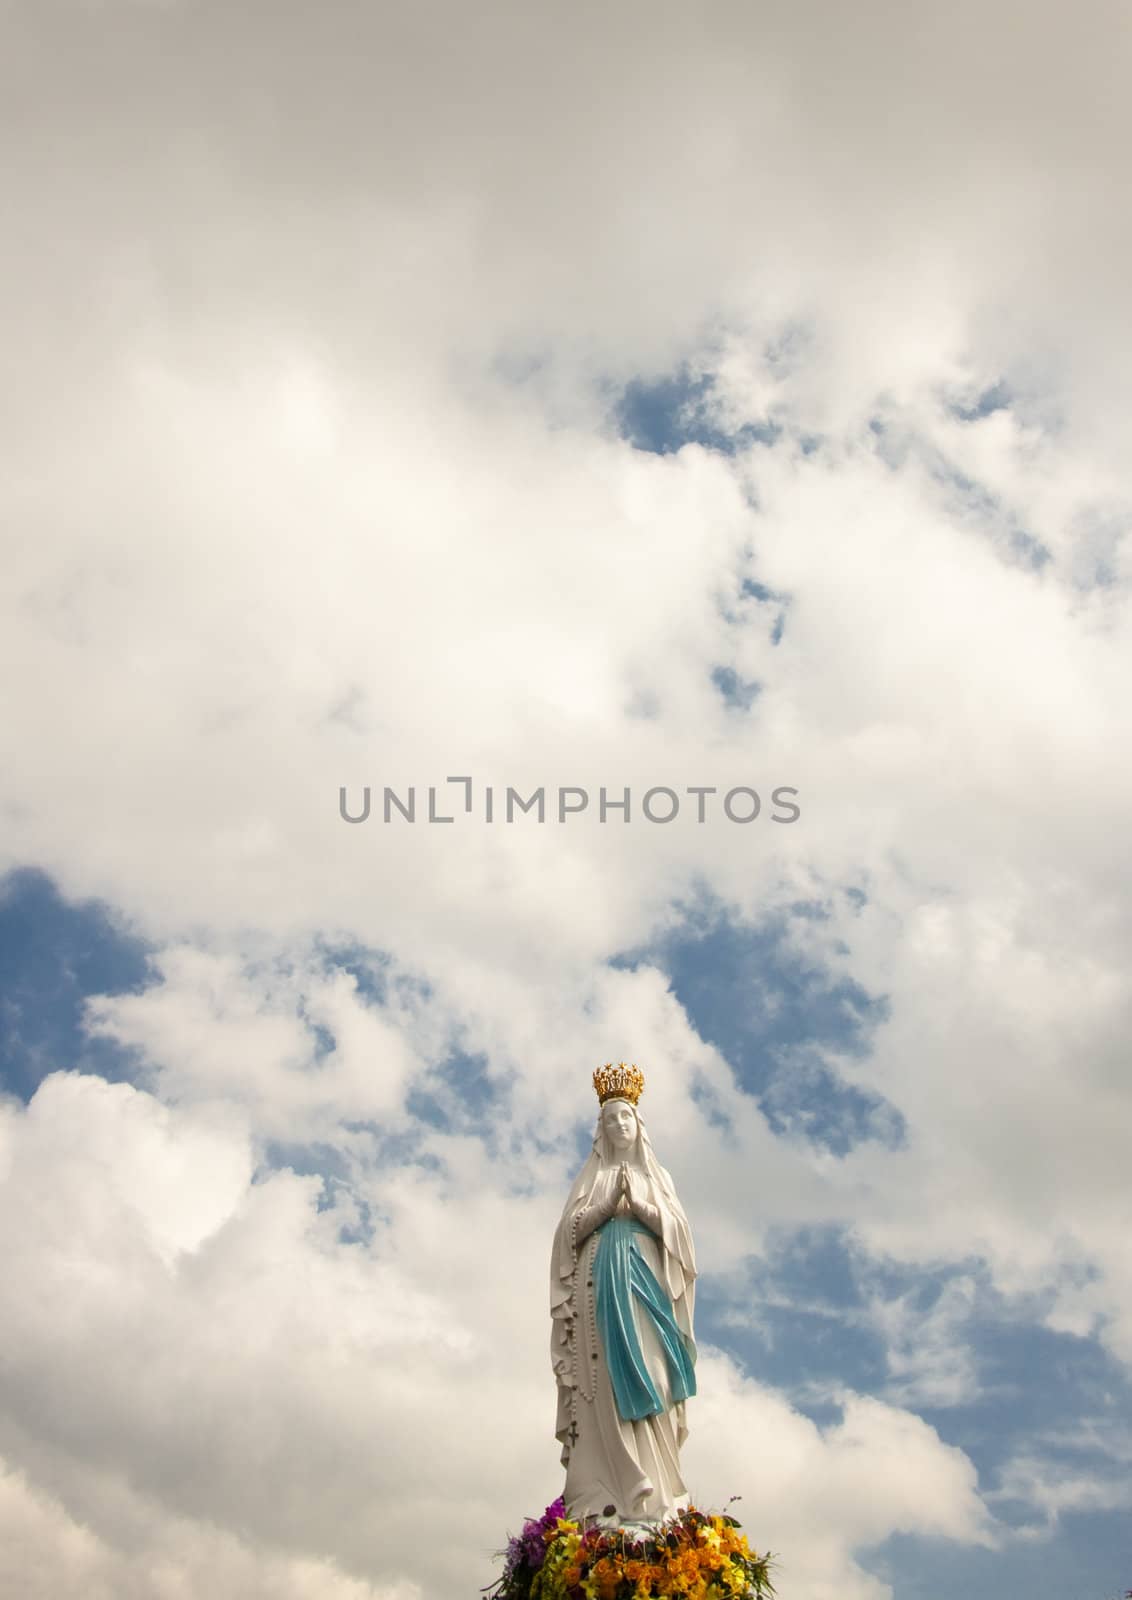 Clouds on the sky and Big figure of the Madonna in Lourdes - France.